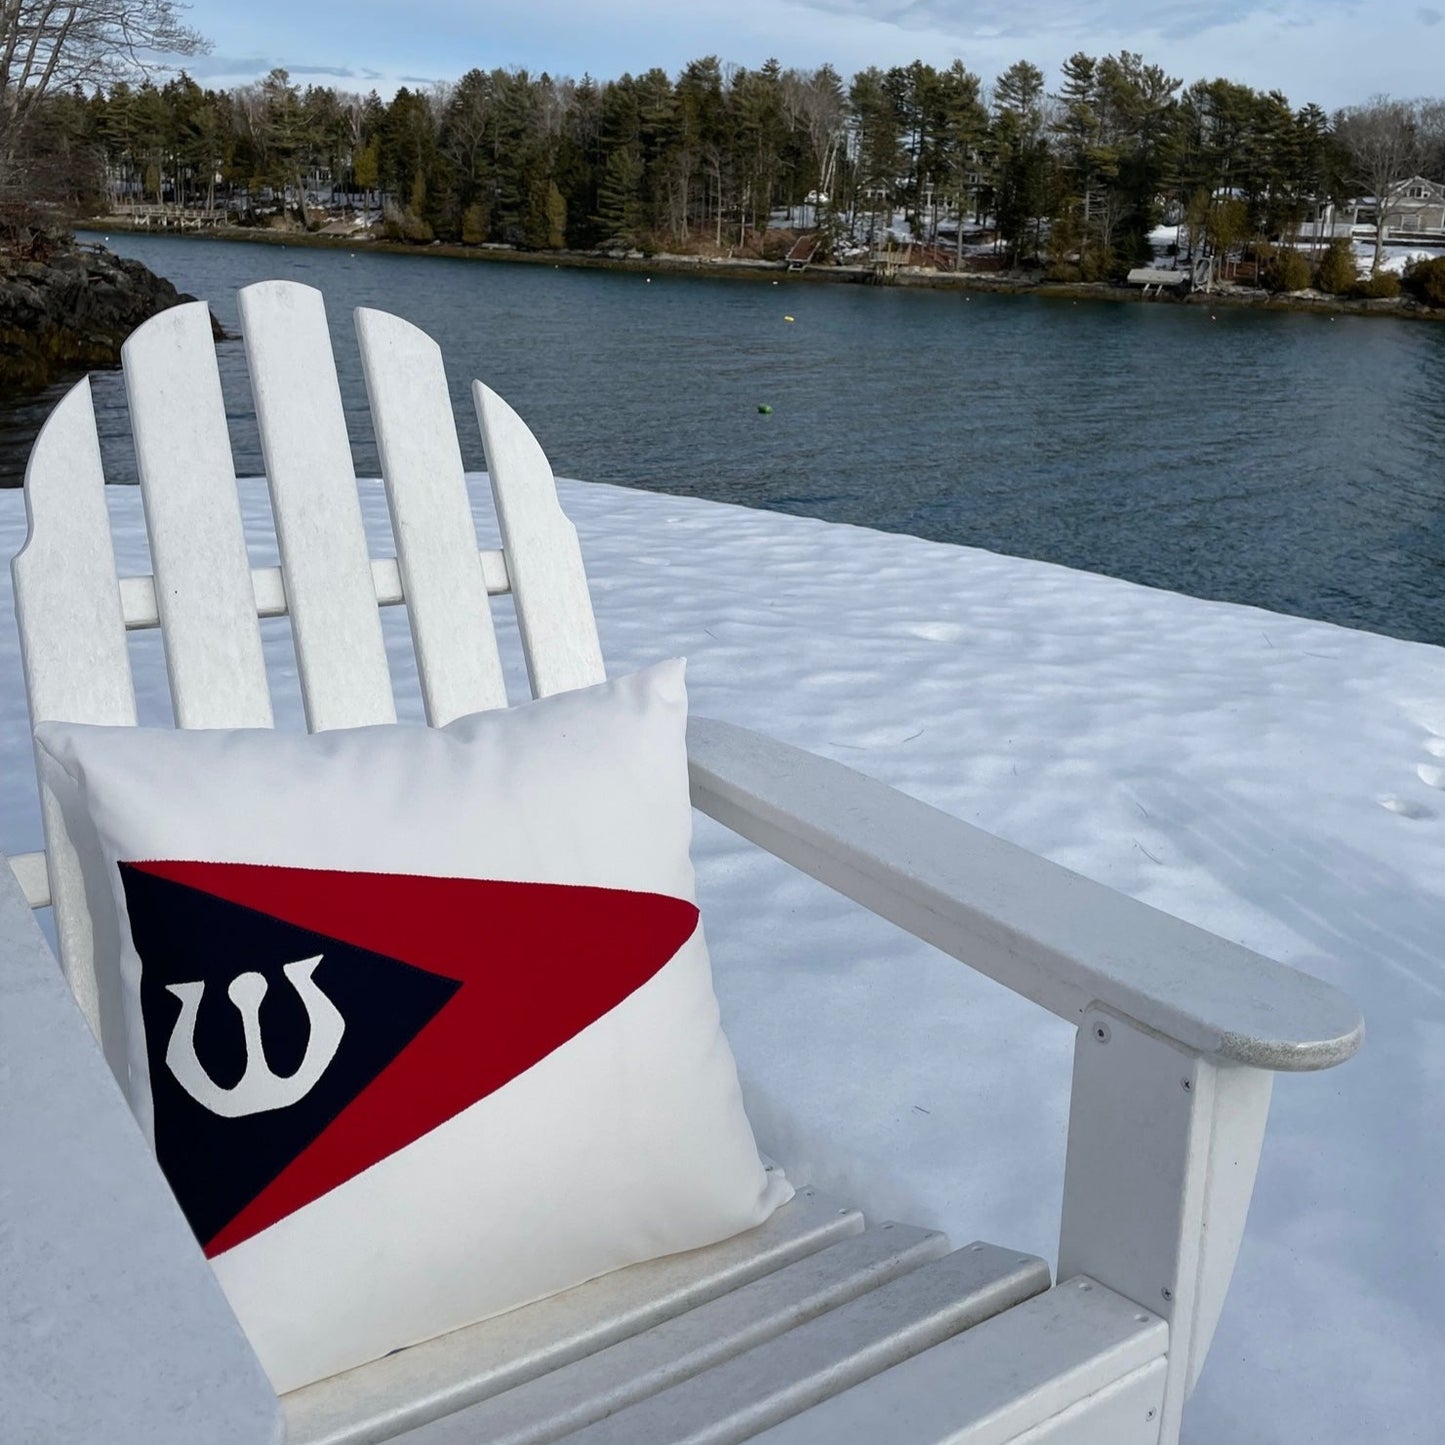 Wianno Yacht Club Pillow